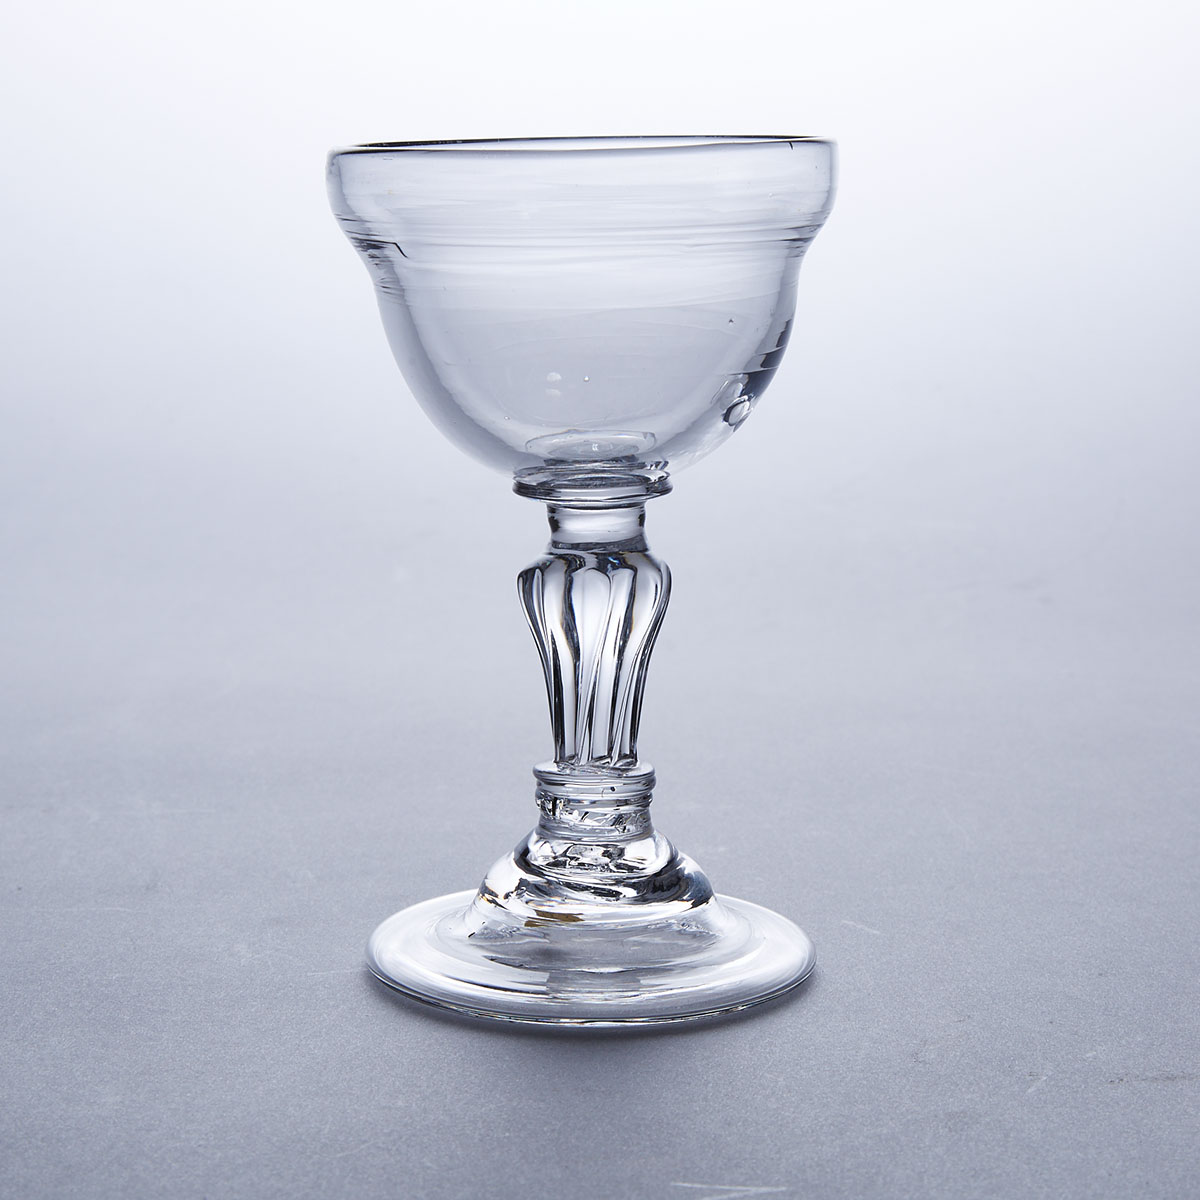 English Moulded Pedestal Stemmed Sweetmeat or Champagne Glass, c.1760